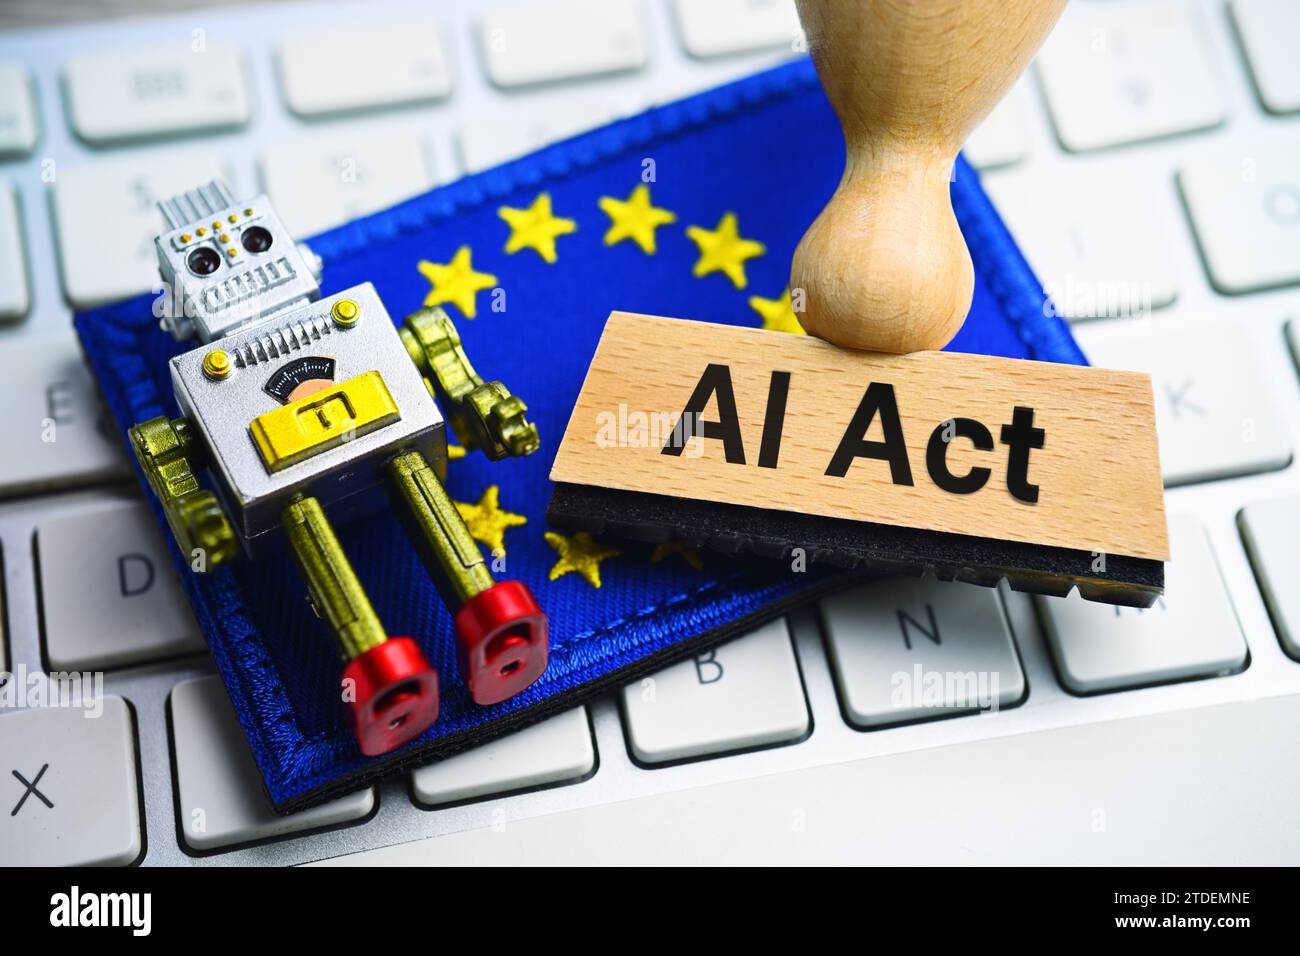 Miniature Robots And AI Act Stamps On A Computer Keyboard In Front Of A European Flag, Photomontage Stock Photo